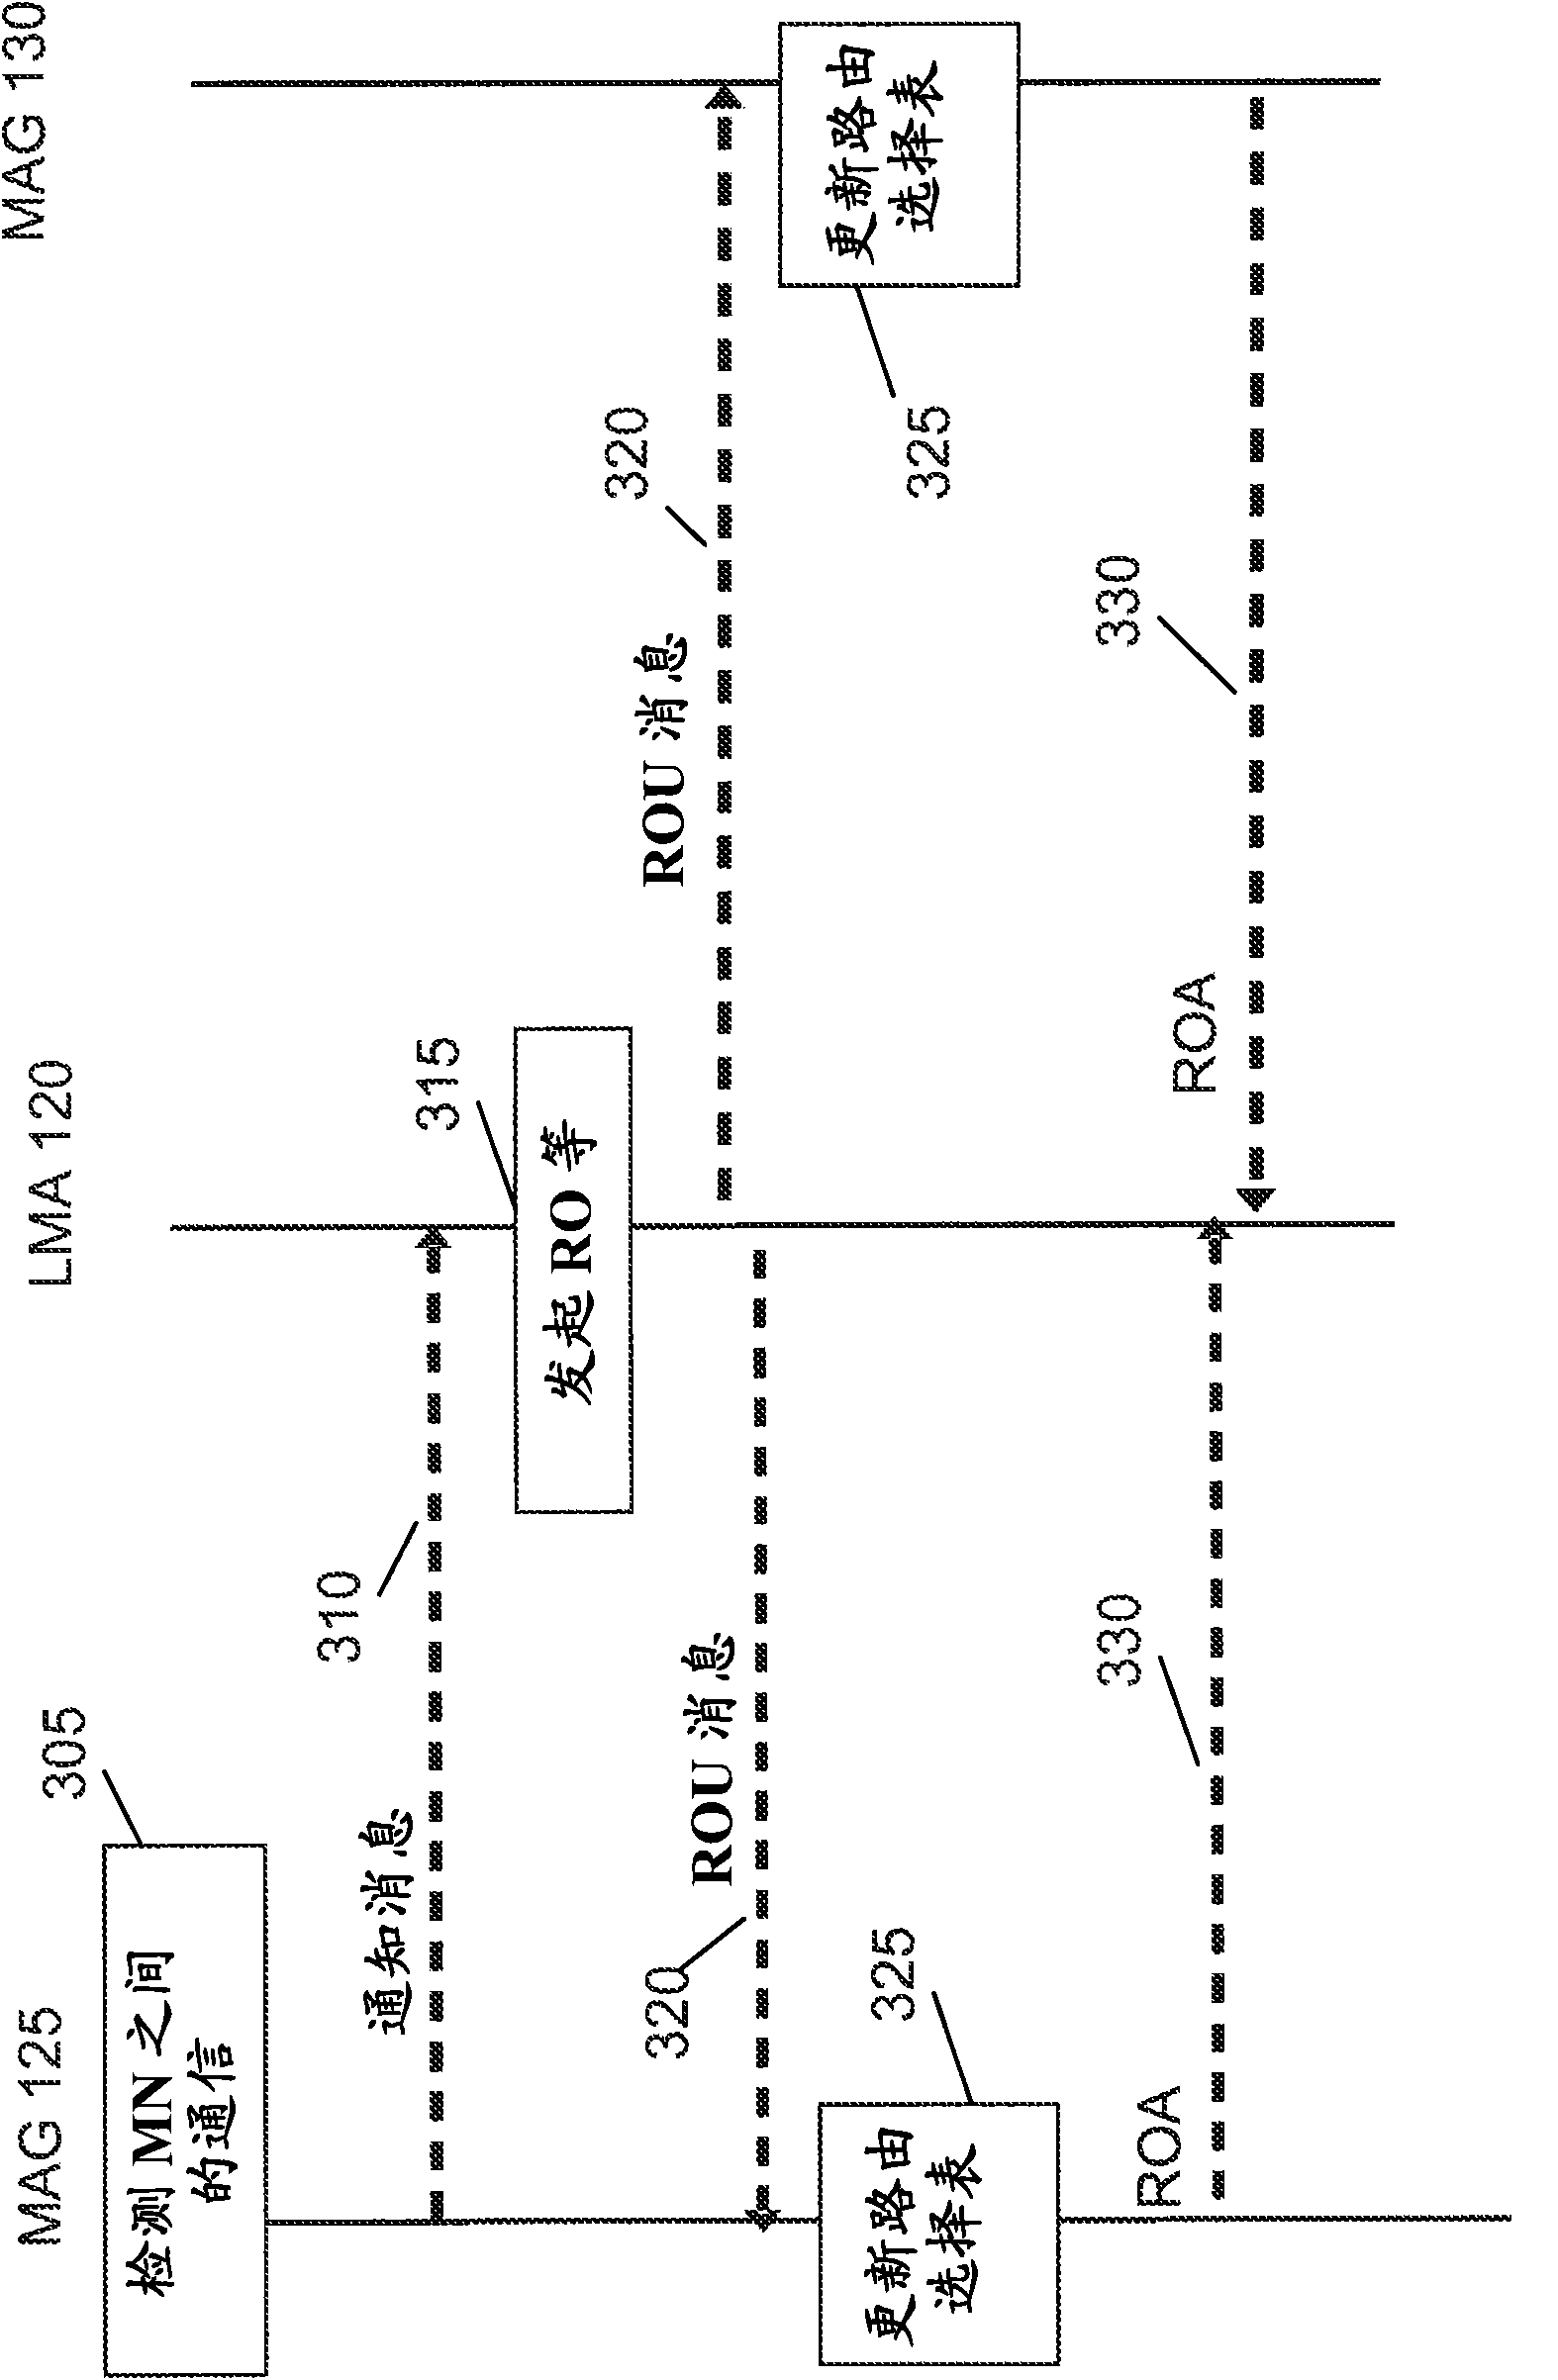 A method and an apparatus for providing route optimisation